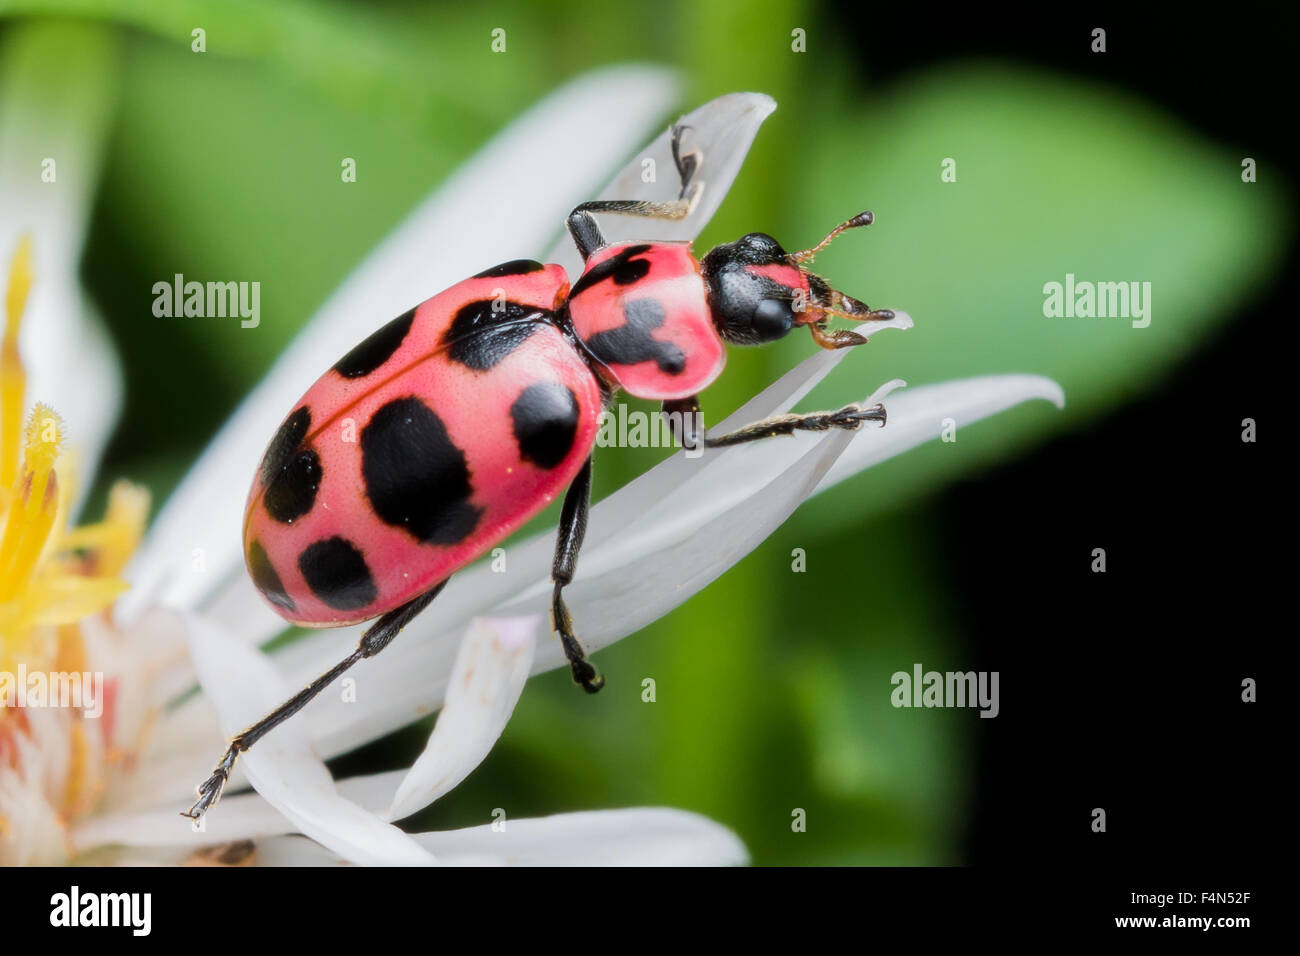 12 spotted lady beetle crawling on white aster flower Stock Photo